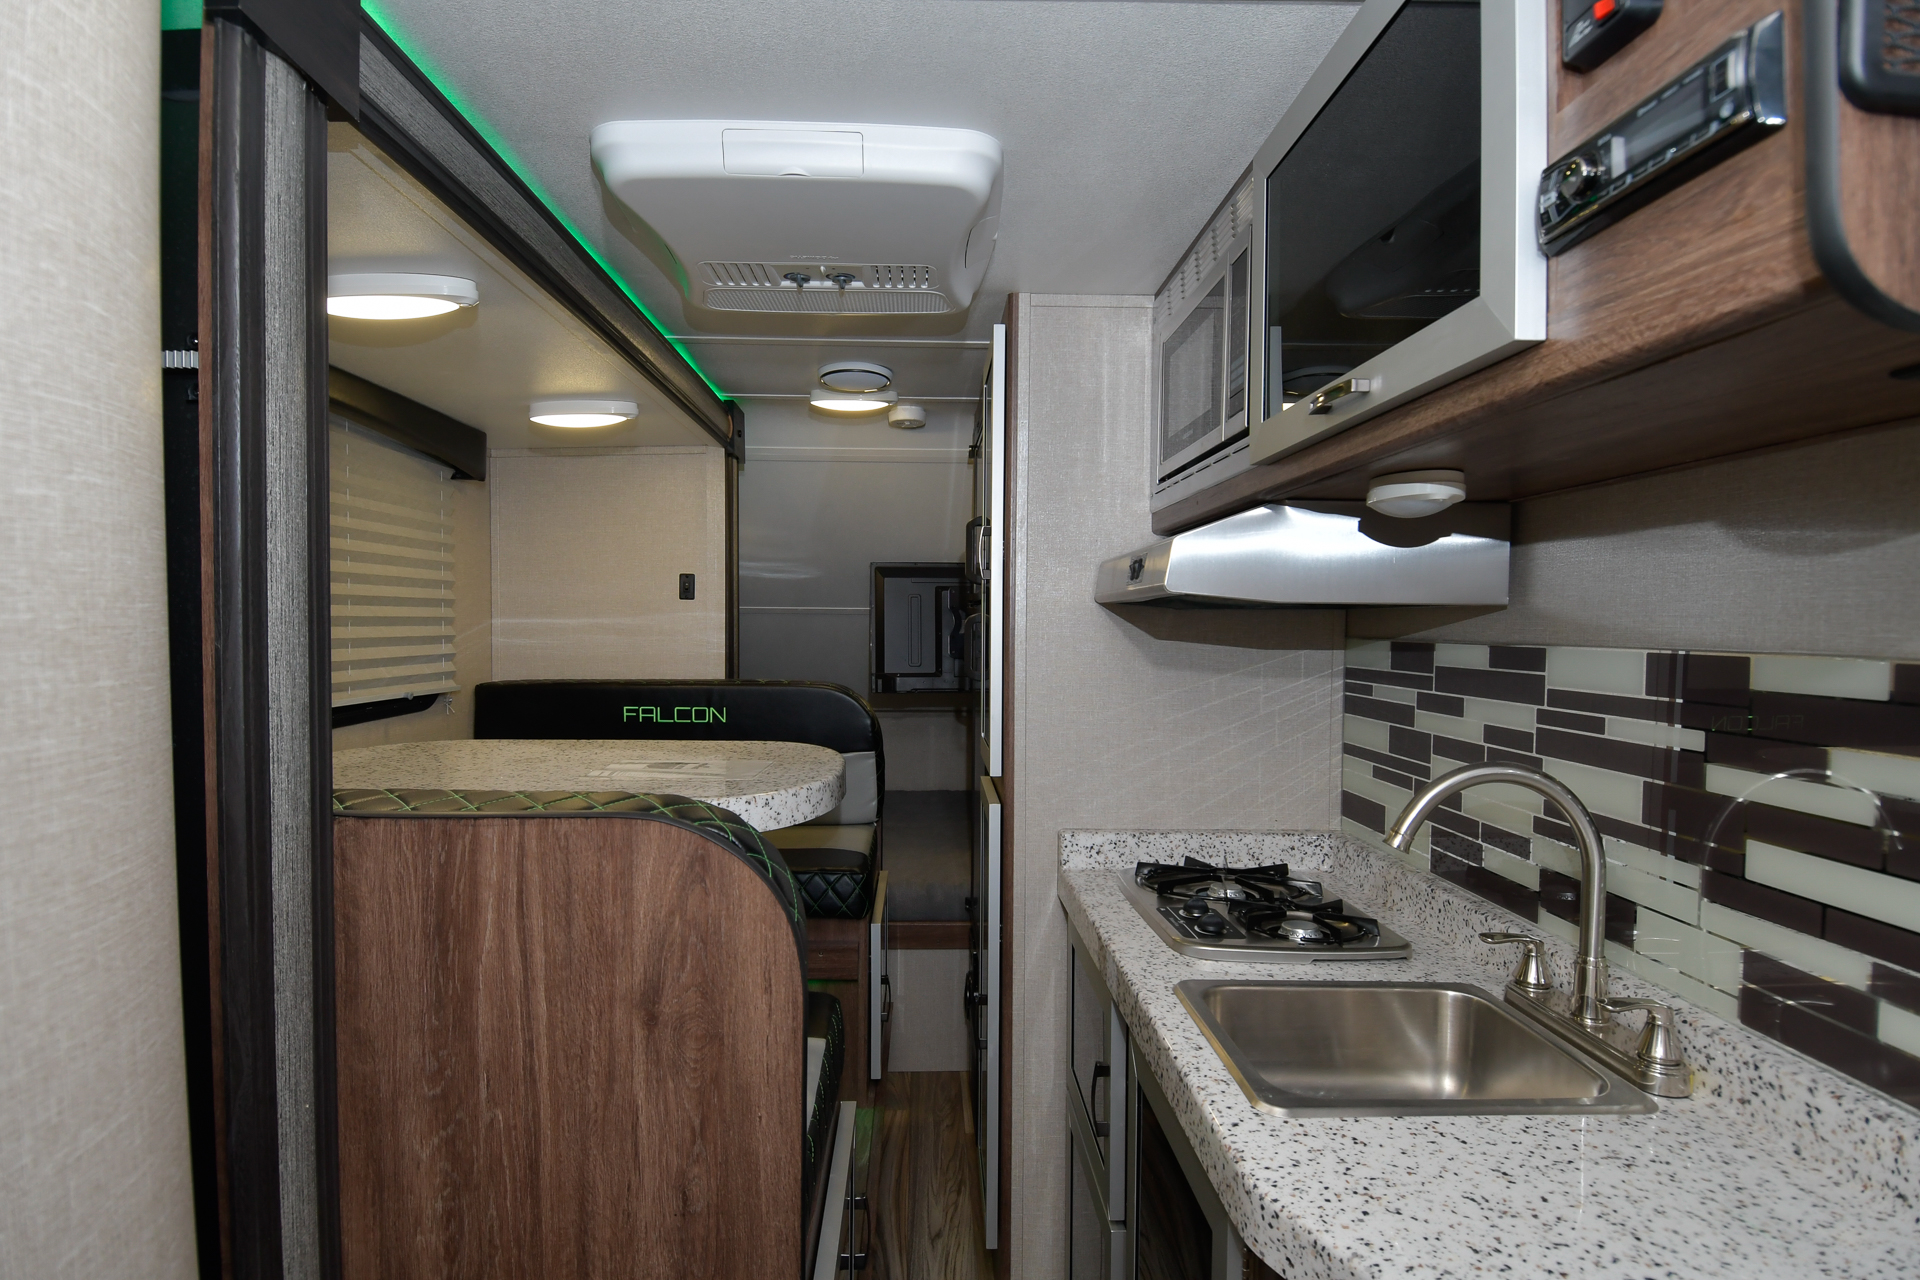 The Falcon GT galley features a molded Granicote fiberglass countertop with stainless steel sink and a two-burner cooktop.